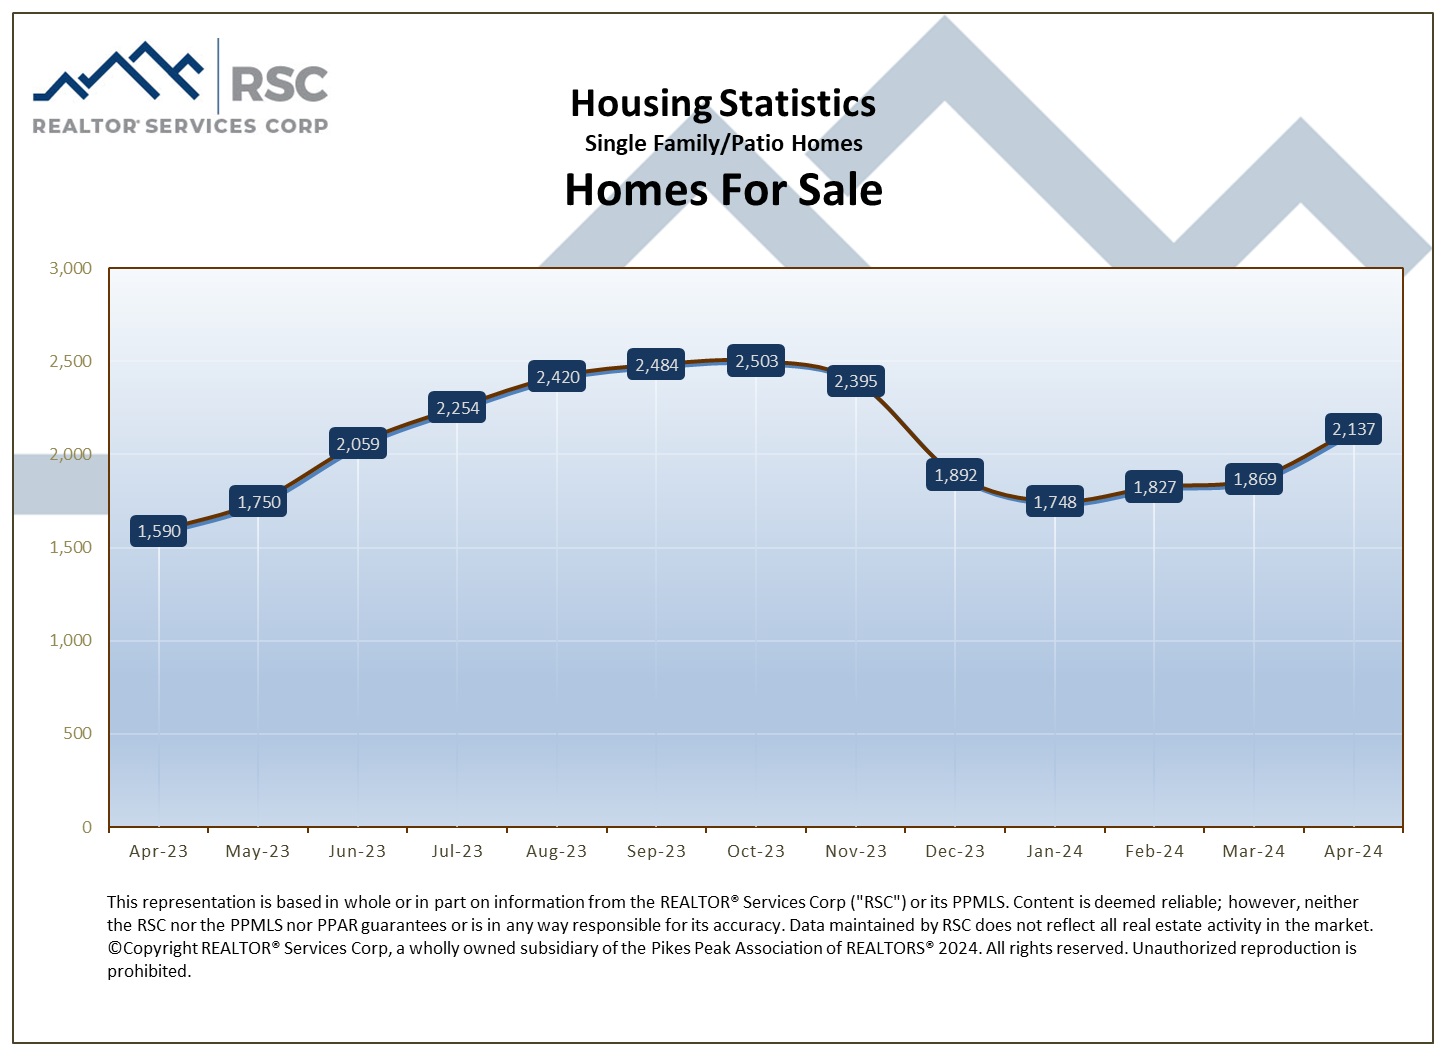 Housing Statistics - Homes for Sale